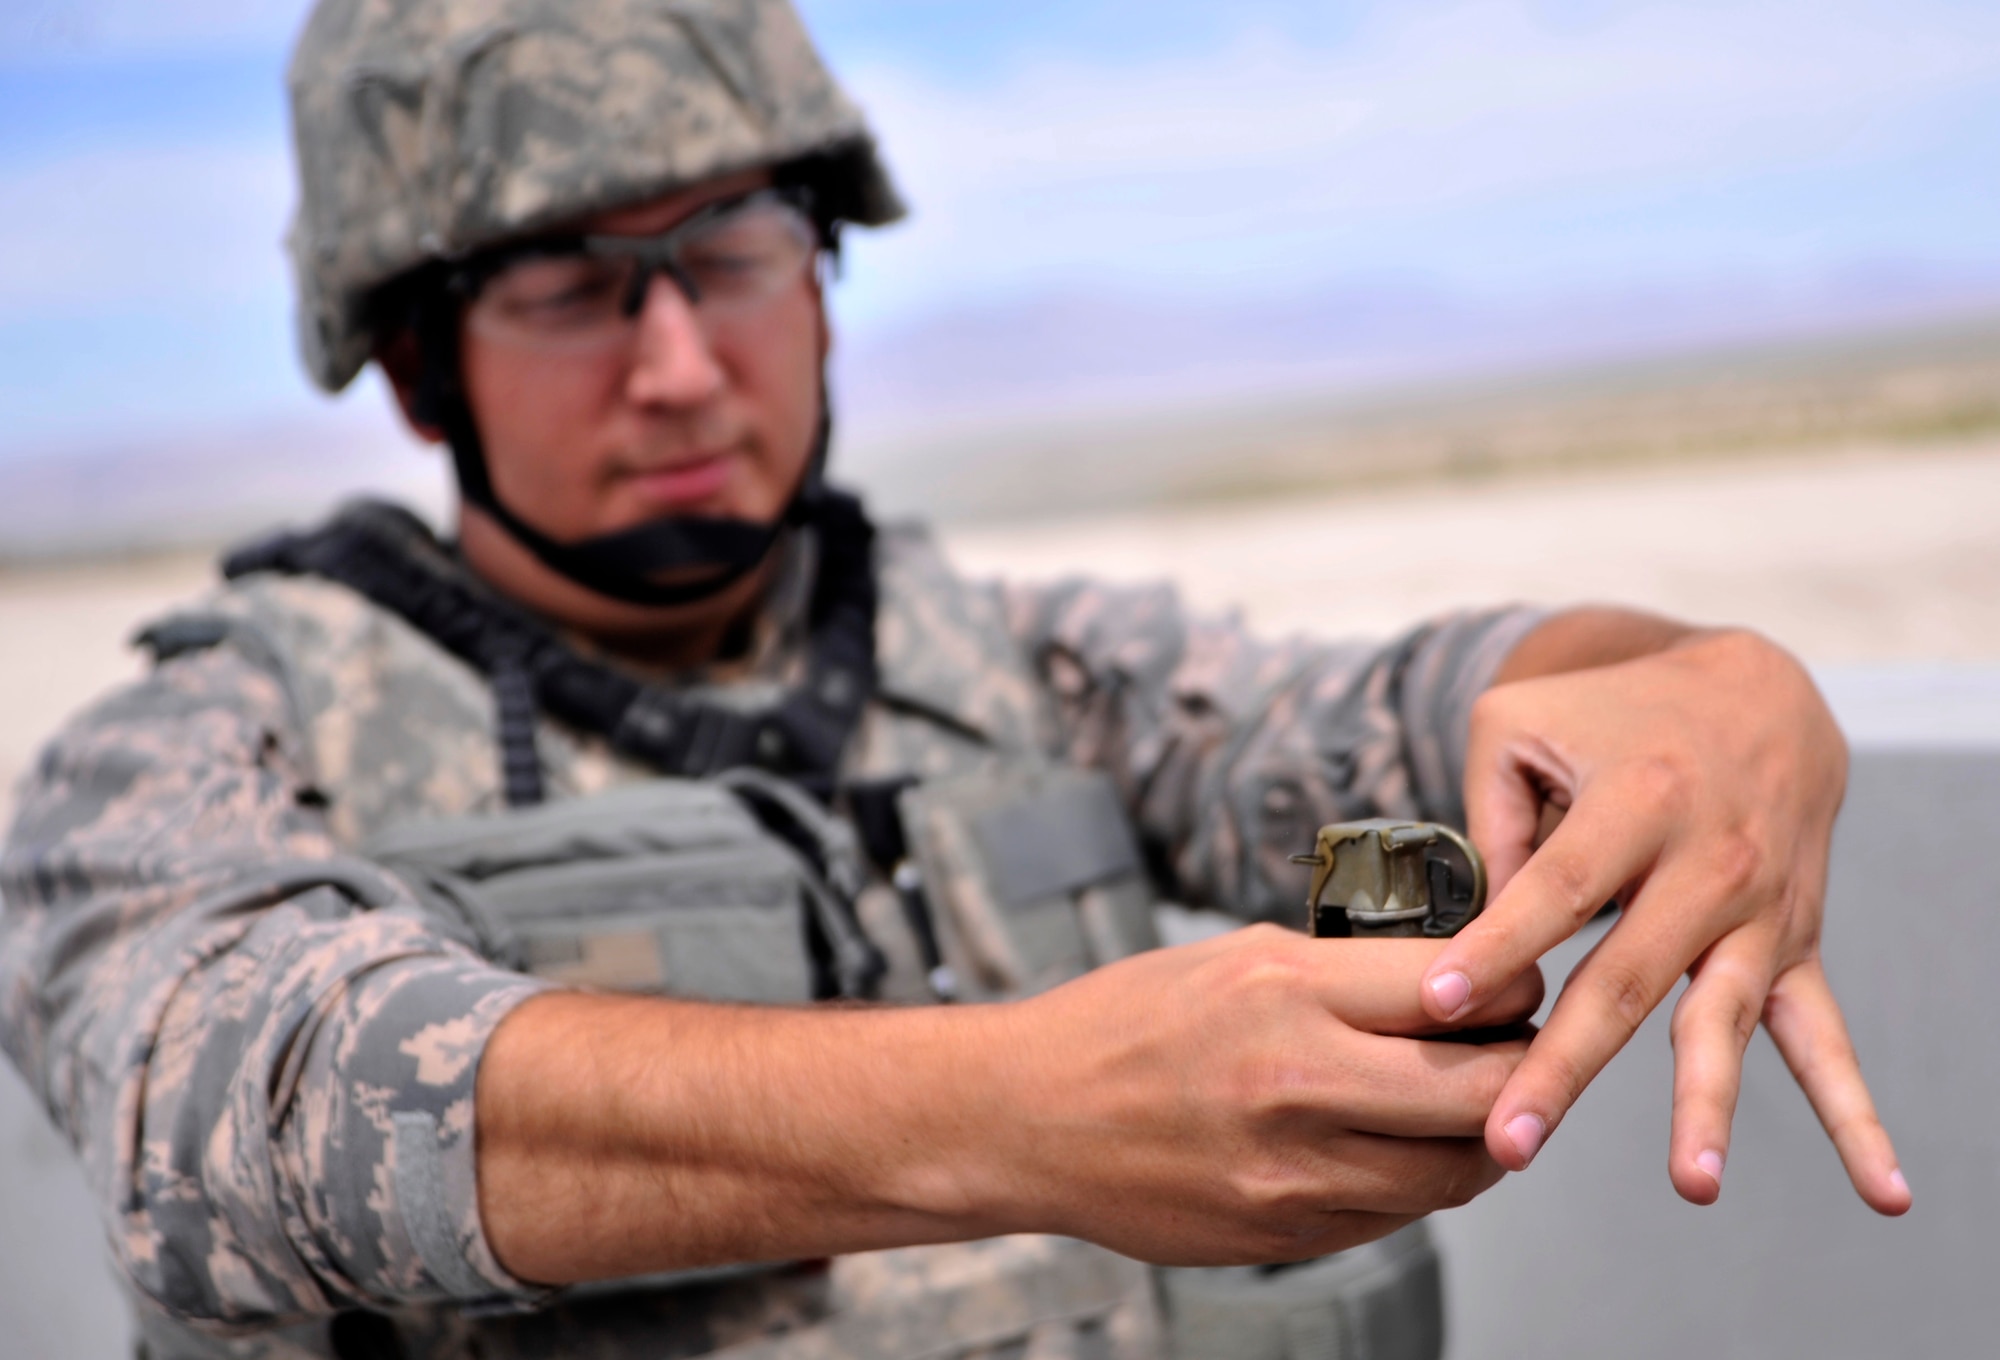 Tech. Sgt. Randall Disch, 99th Ground Combat Training Squadron Combat Arms instructor, releases the safety pin of an M-67 fragmentation grenade during the M-67 fragmentation grenade training class Aug. 30, 2014, at Silver Flag Alpha, Nevada. This is the last time the course will take place at Silver Flag. Next year the course will be consolidated with the U.S. Army at Fort Bliss, Texas. (U.S. Air Force photo by Airman 1st Class Christian Clausen/Released)